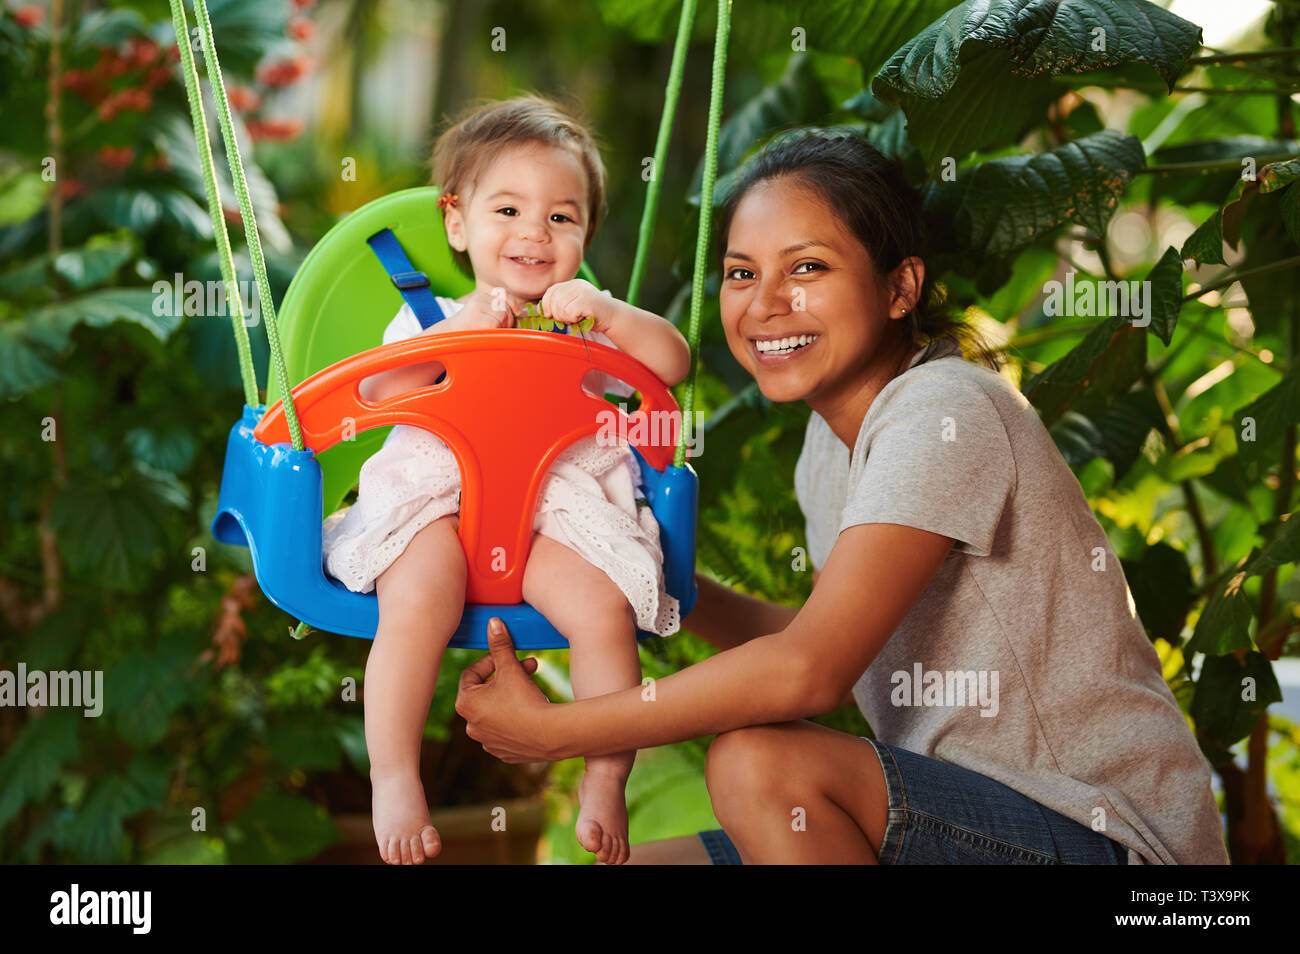 Smiling girl nurse play with baby on swings Stock Photo